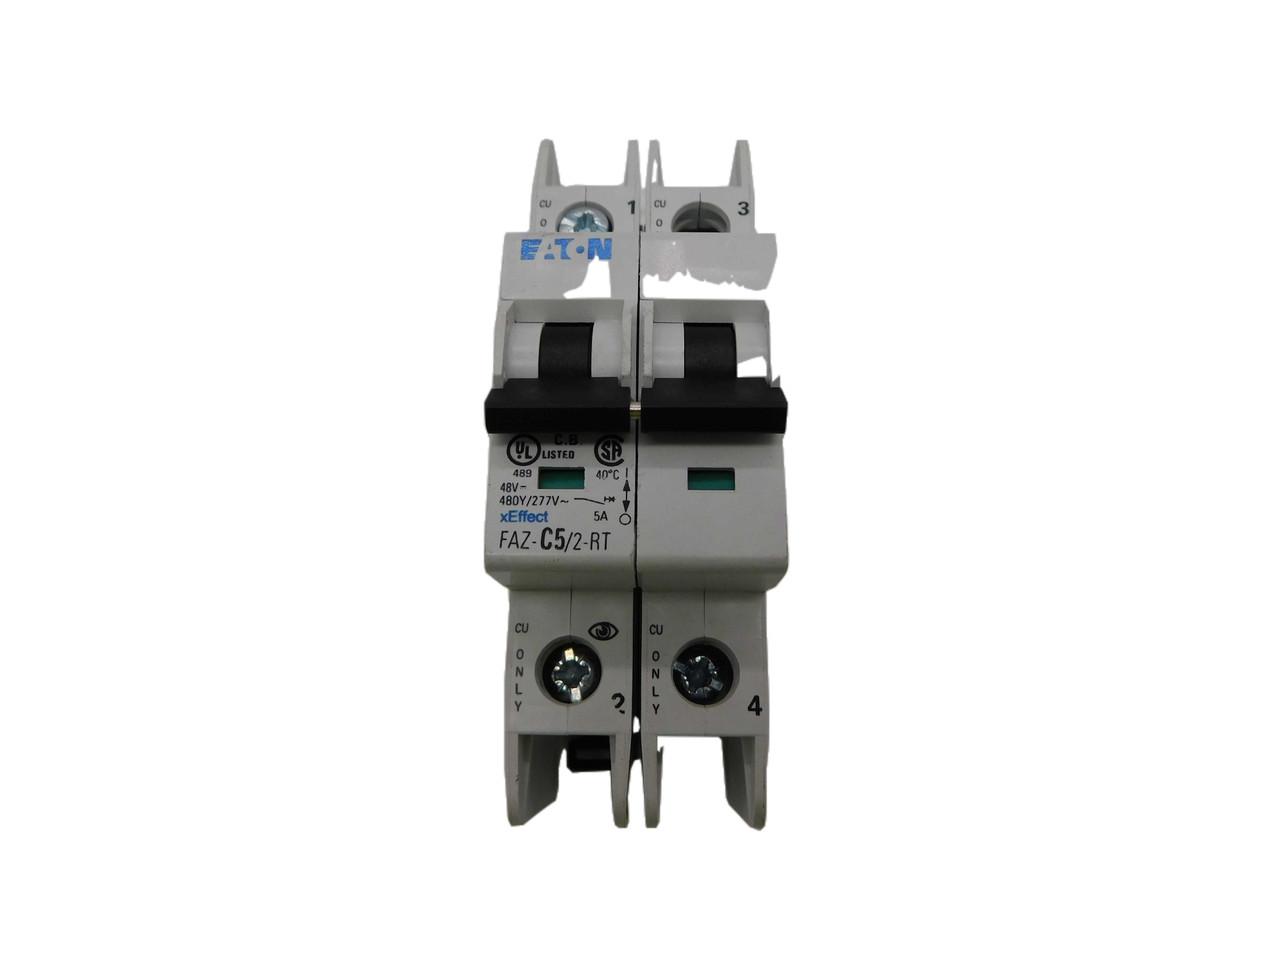 Eaton FAZ-C5/2-RT 277/480 VAC 50/60 Hz, 5 A, 2-Pole, 10/14 kA, 5 to 10 x Rated Current, Ring Tongue Terminal, DIN Rail Mount, Standard Packaging, C-Curve, Current Limiting, Thermal Magnetic